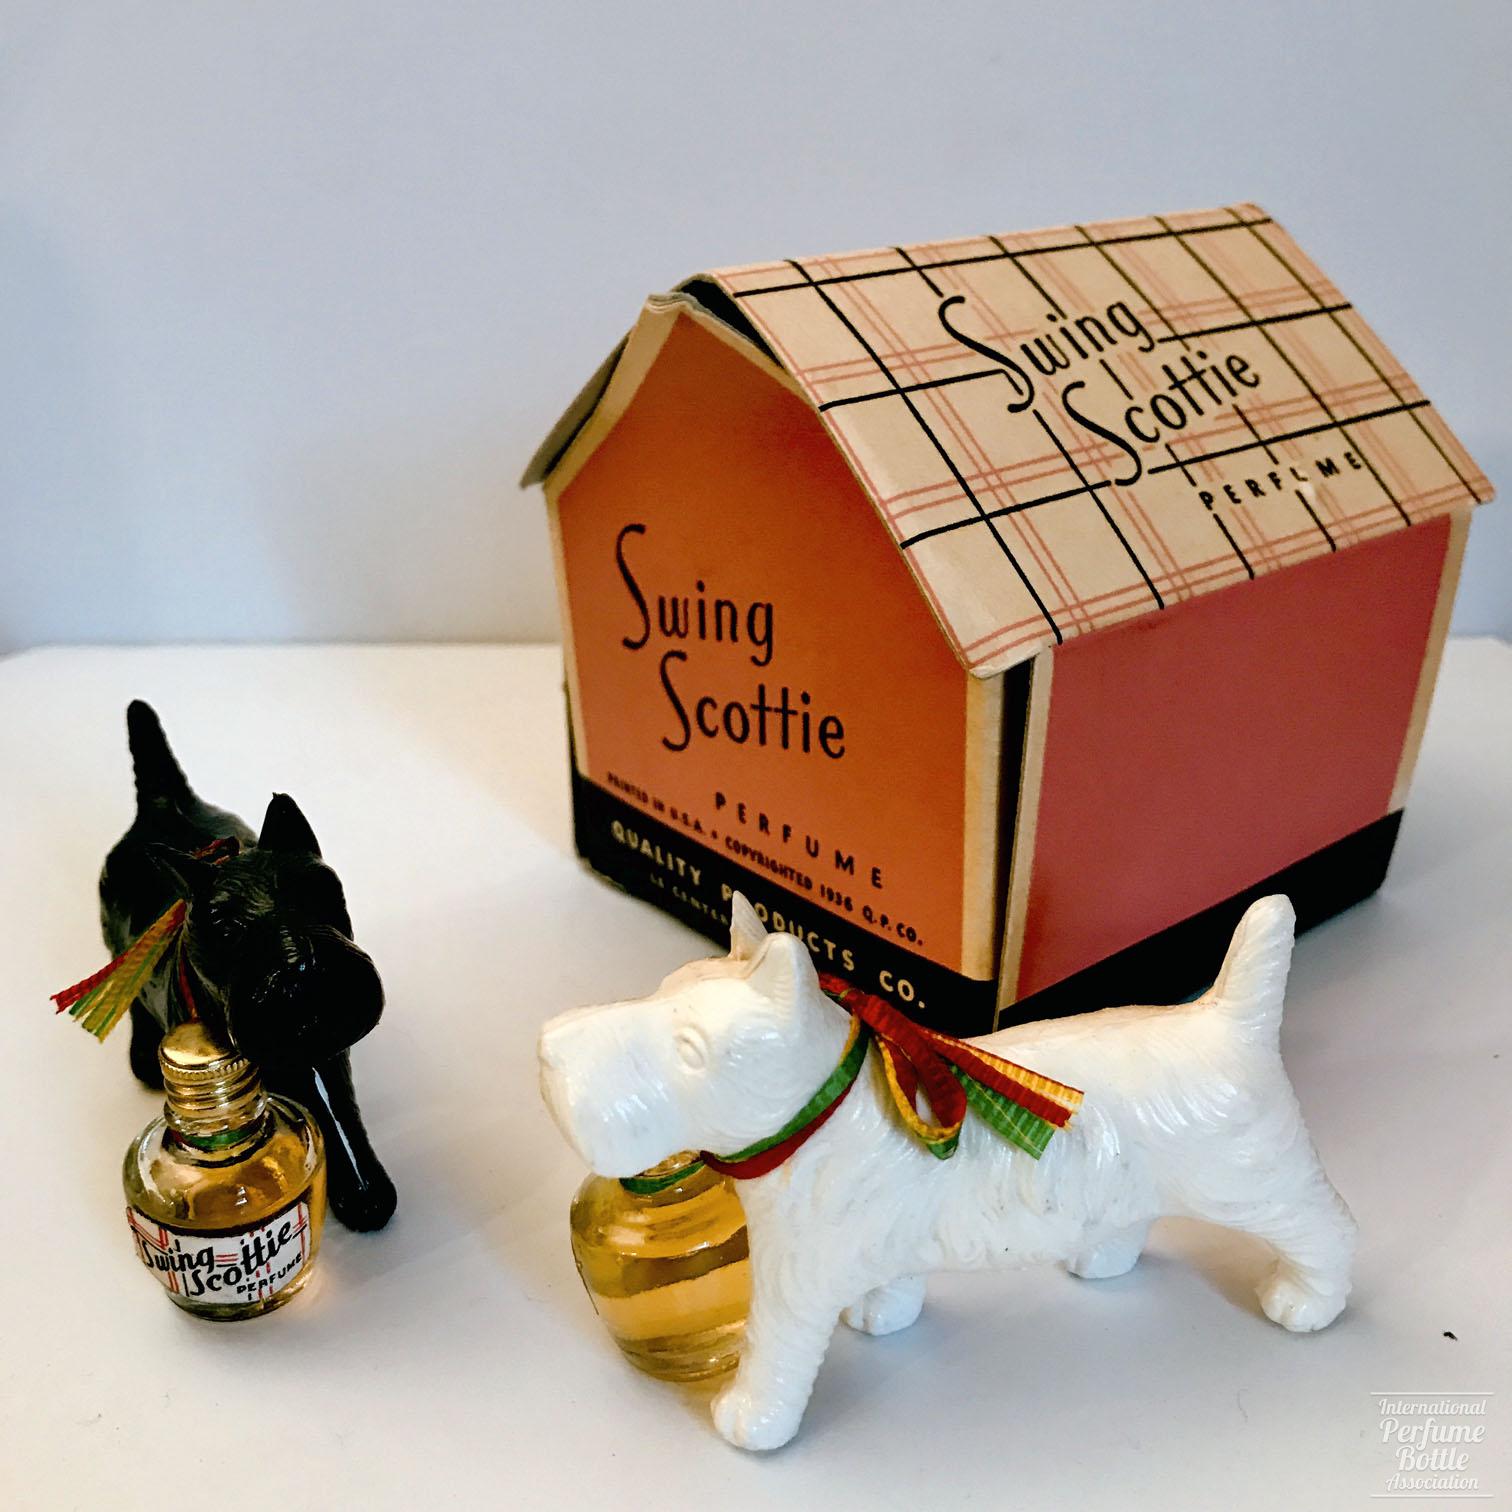 "Swing Scottie" by Quality Products